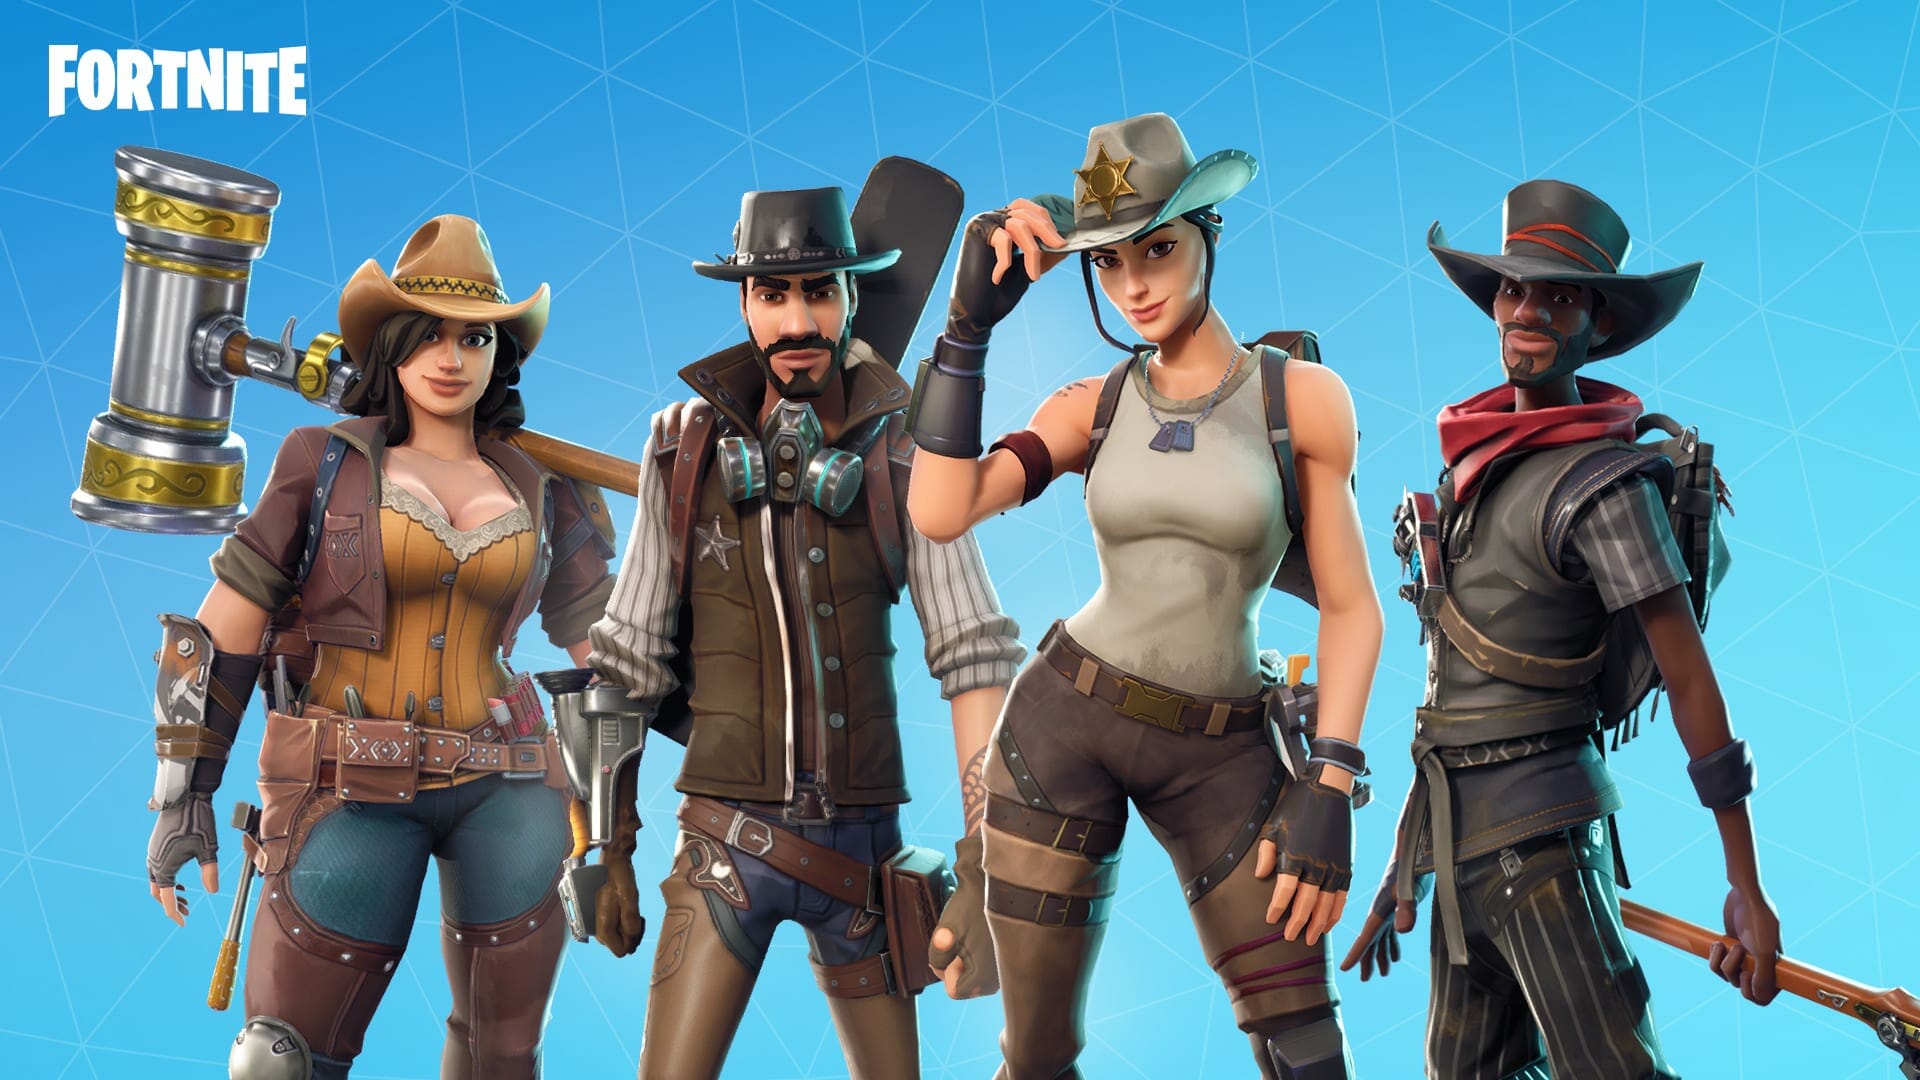 Fortnite New Wild West Skins will be available during the ... - 1920 x 1080 jpeg 1705kB